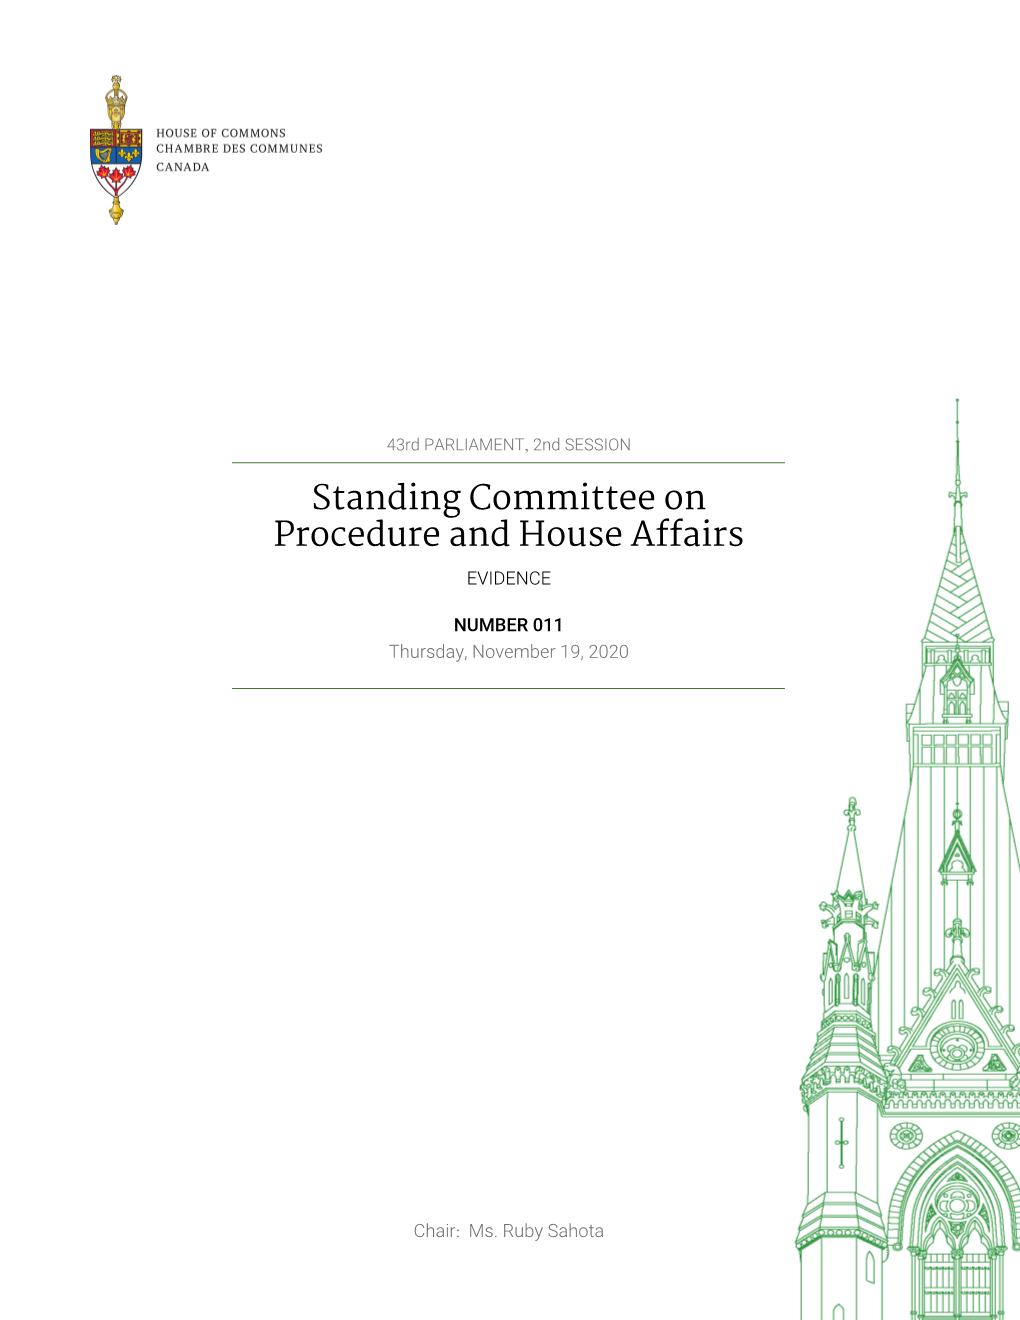 Evidence of the Standing Committee on Procedure and House Affairs